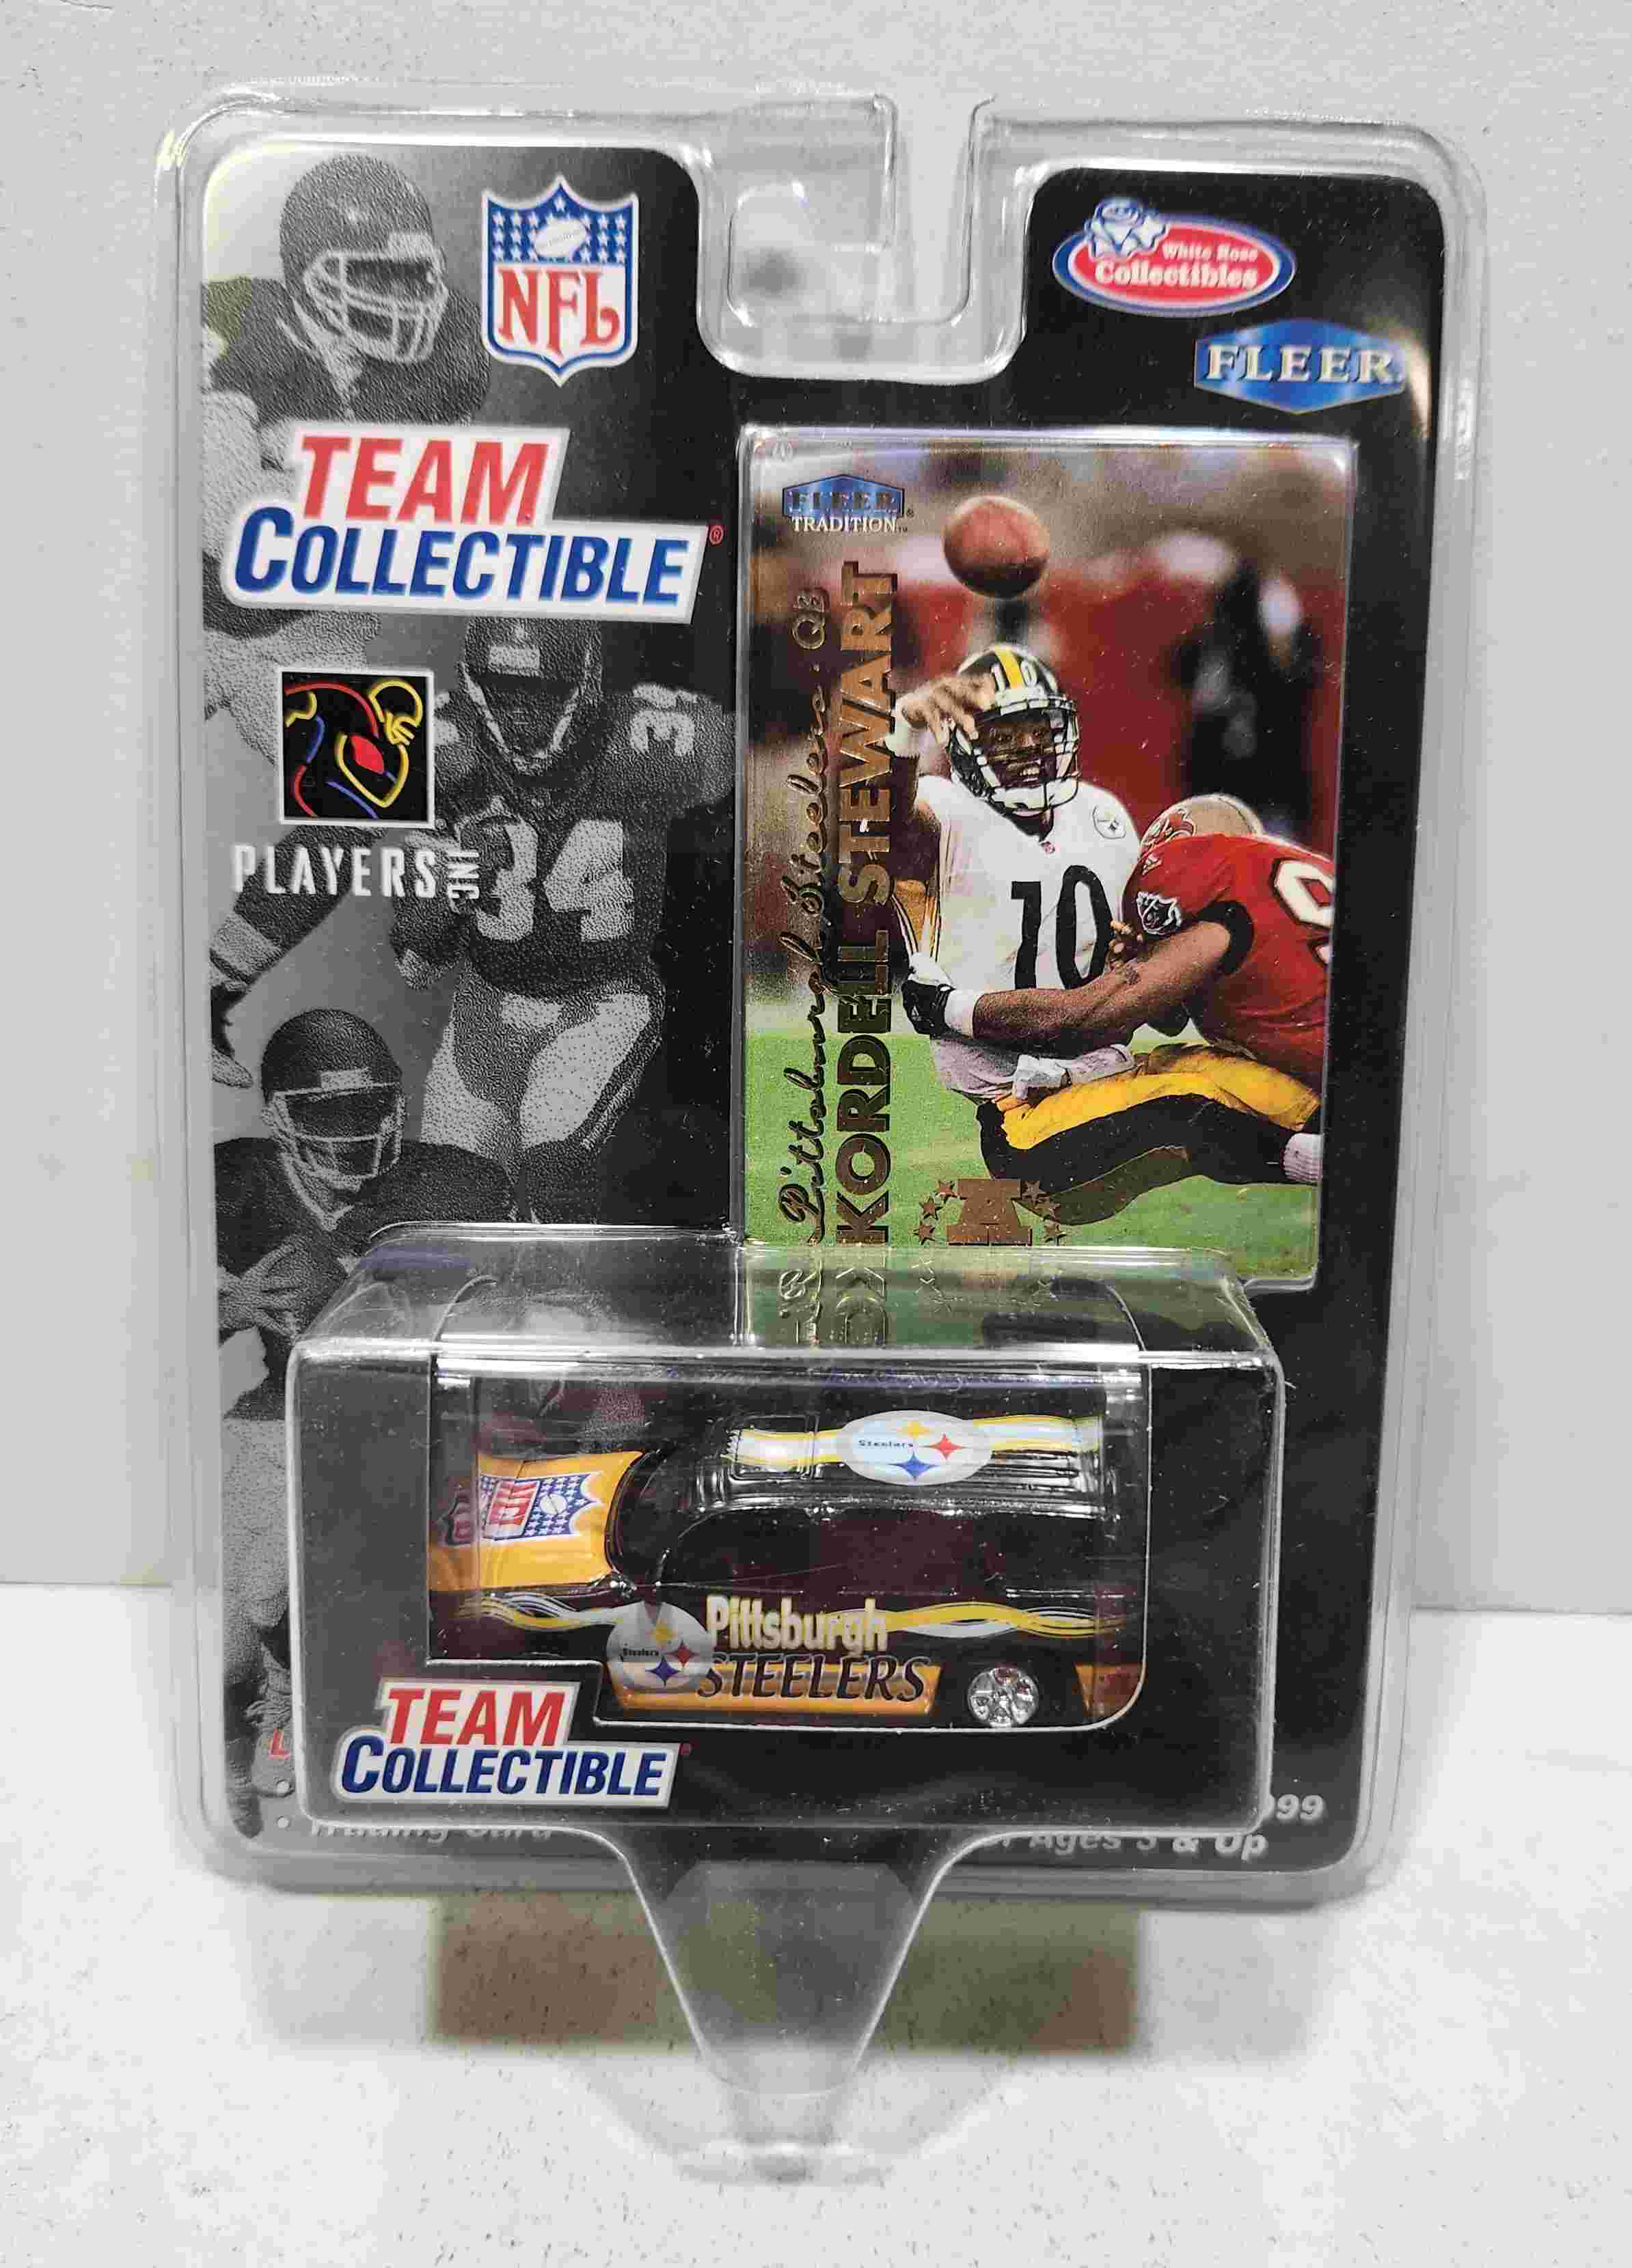 1999 Pittsburgh Steelers 1/64th Yukon with Kordell Stewart trading card